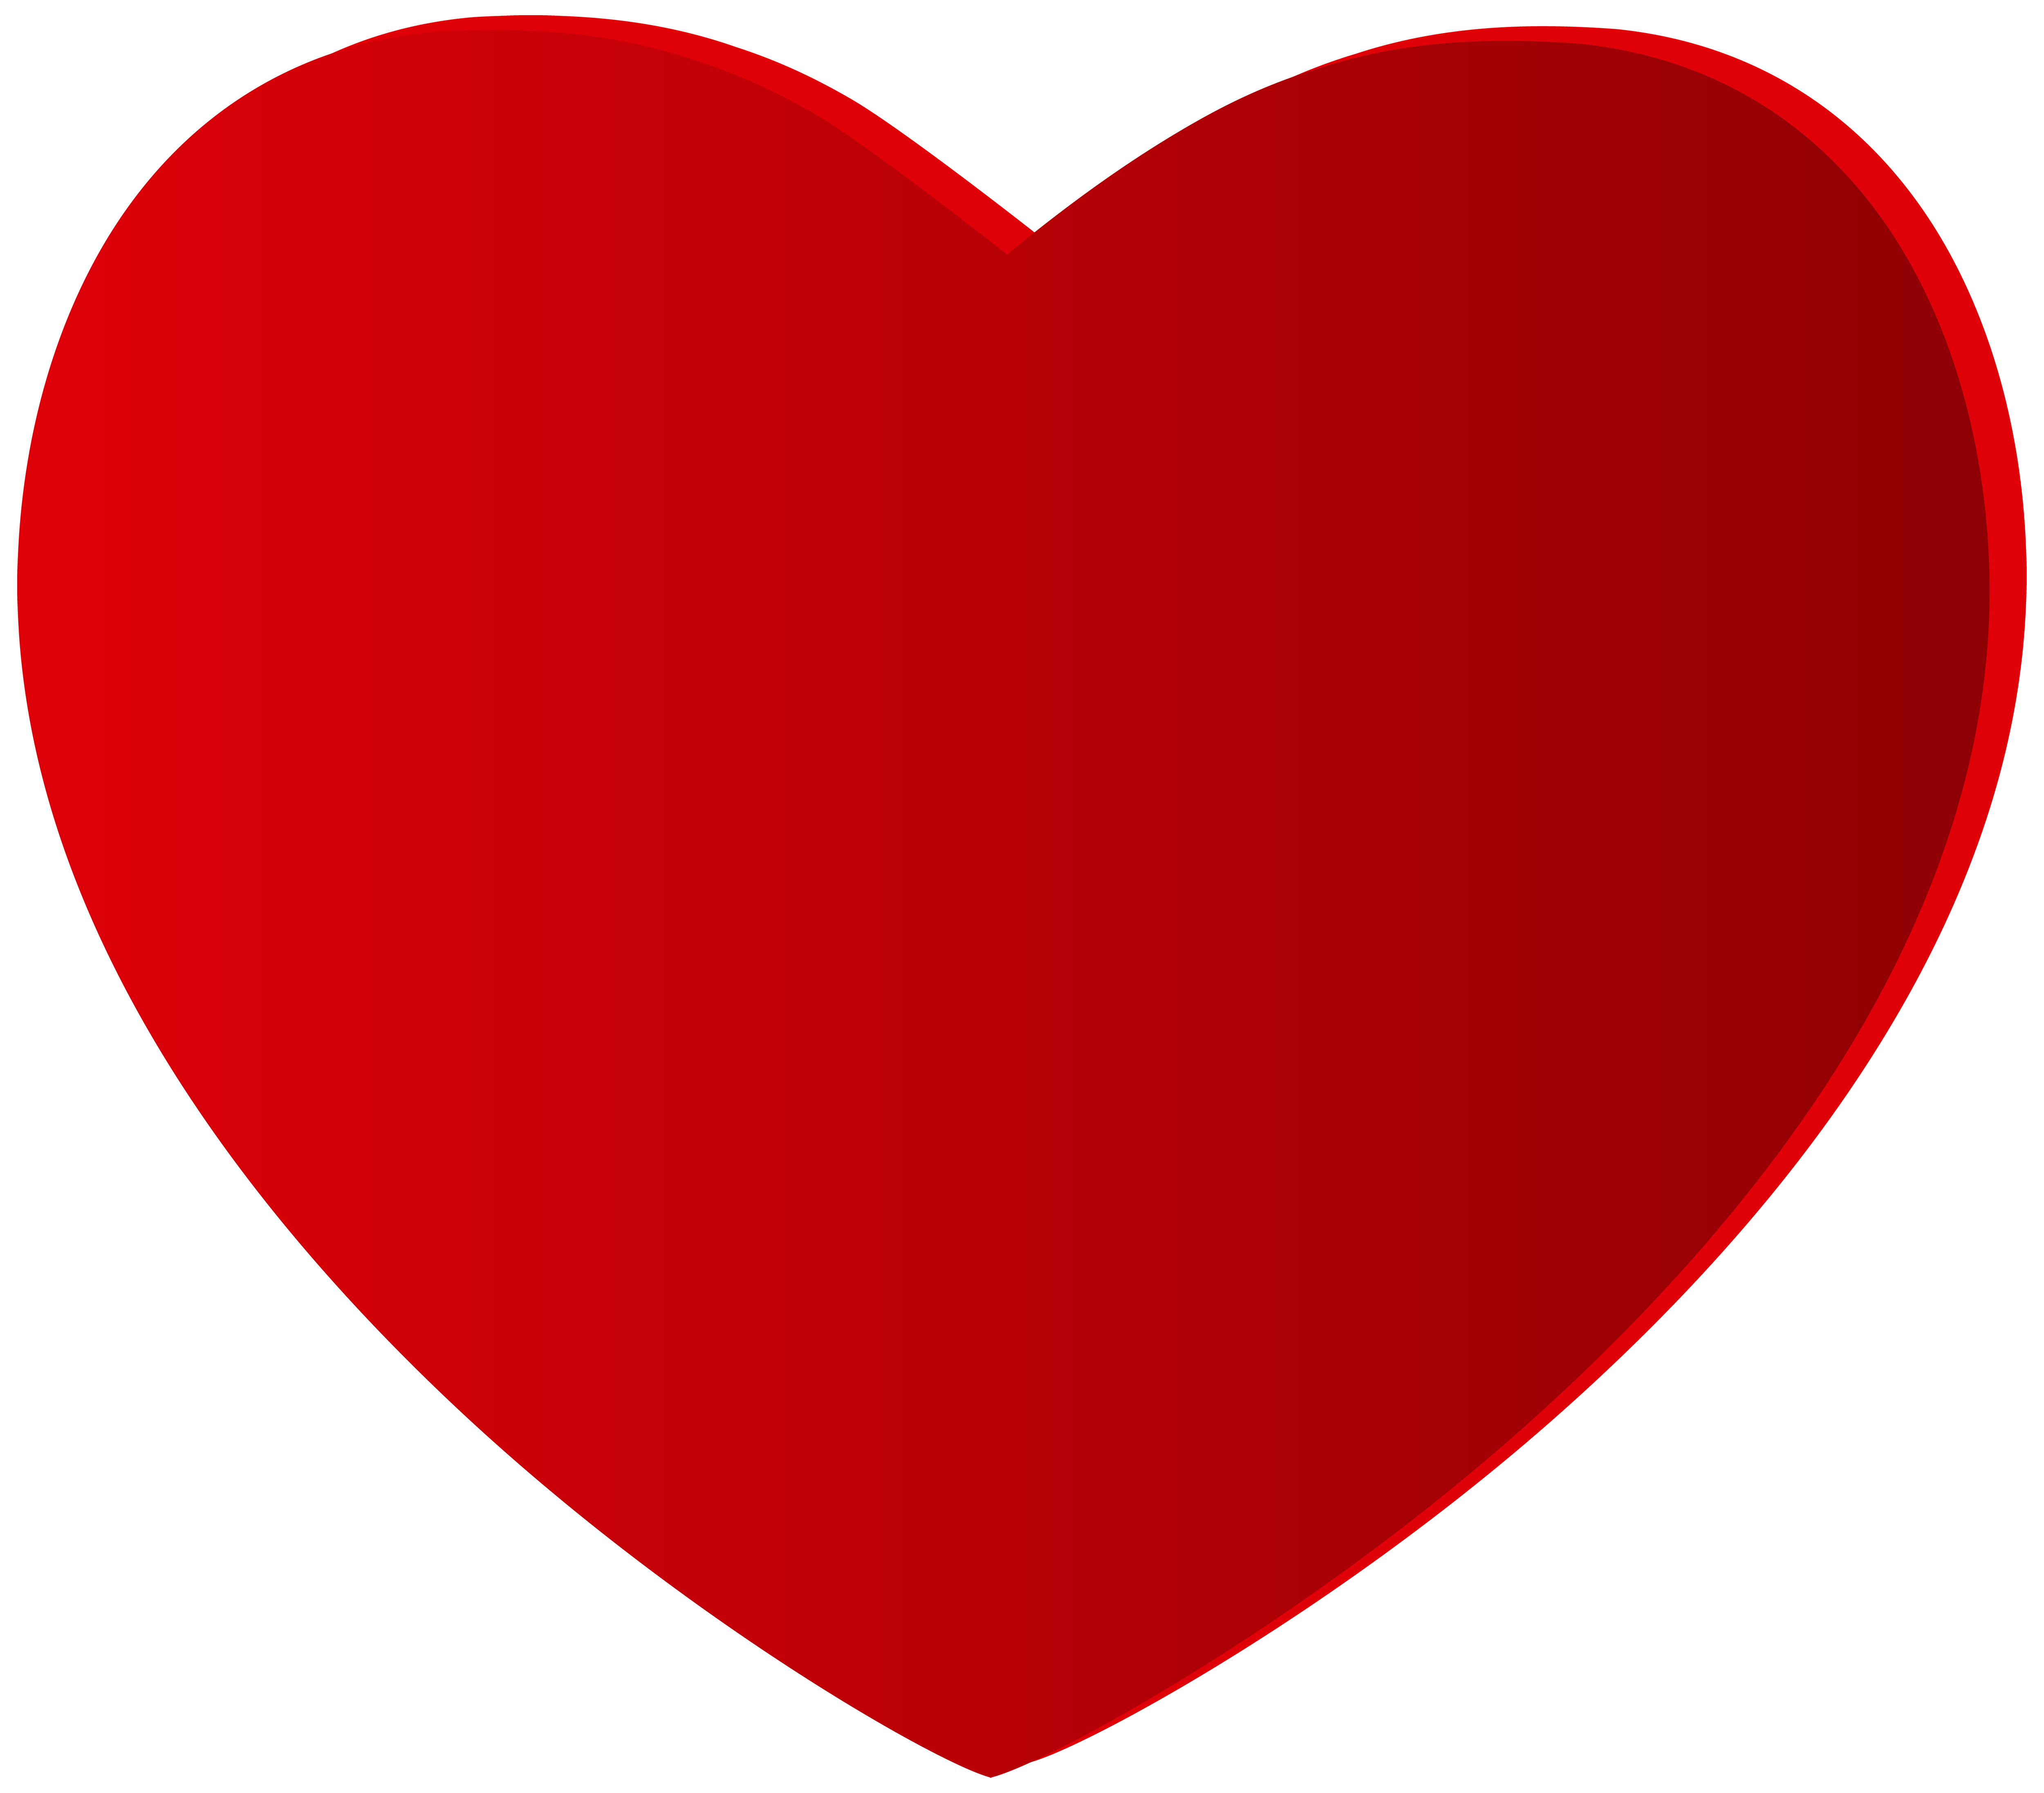 Red hearts png. Large heart clipart best